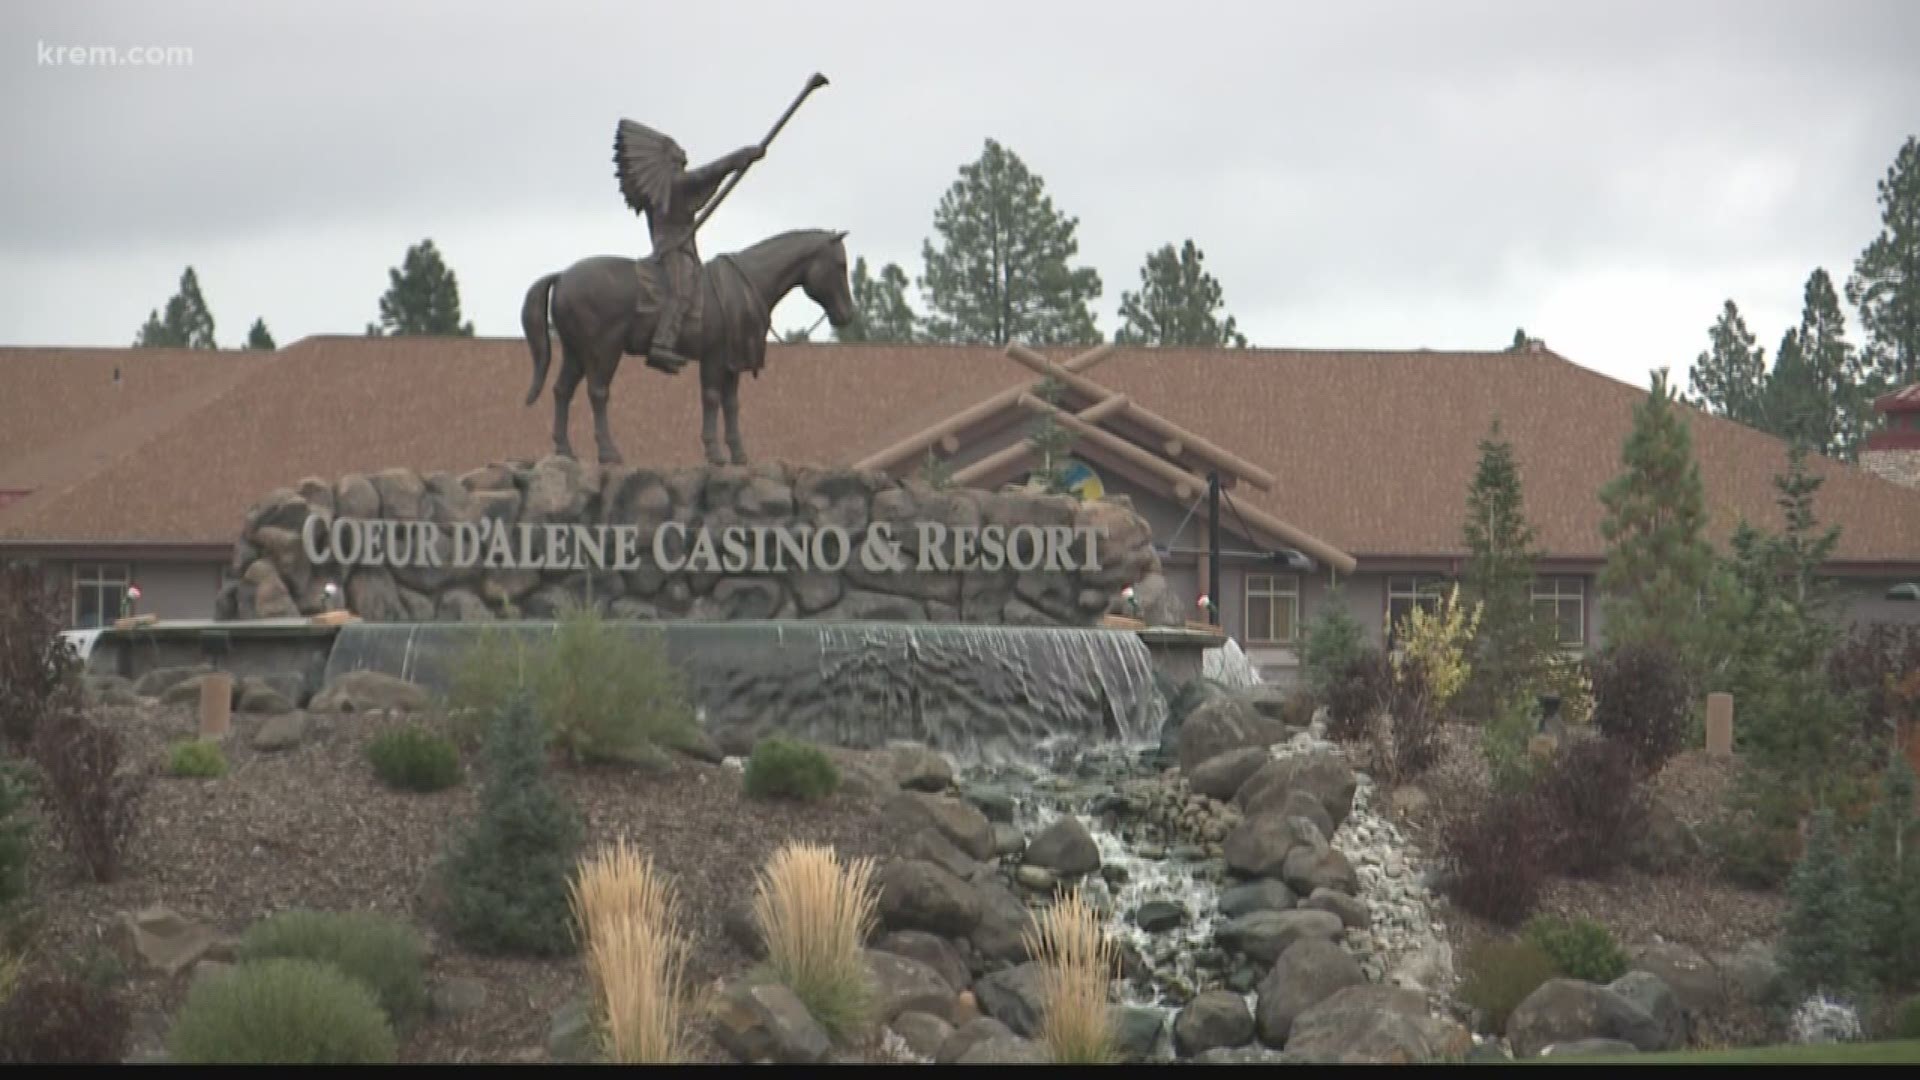 Some restaurants at the casino are open on Monday with enhanced cleaning protocols and reduced seating capacity, according to a spokesperson.